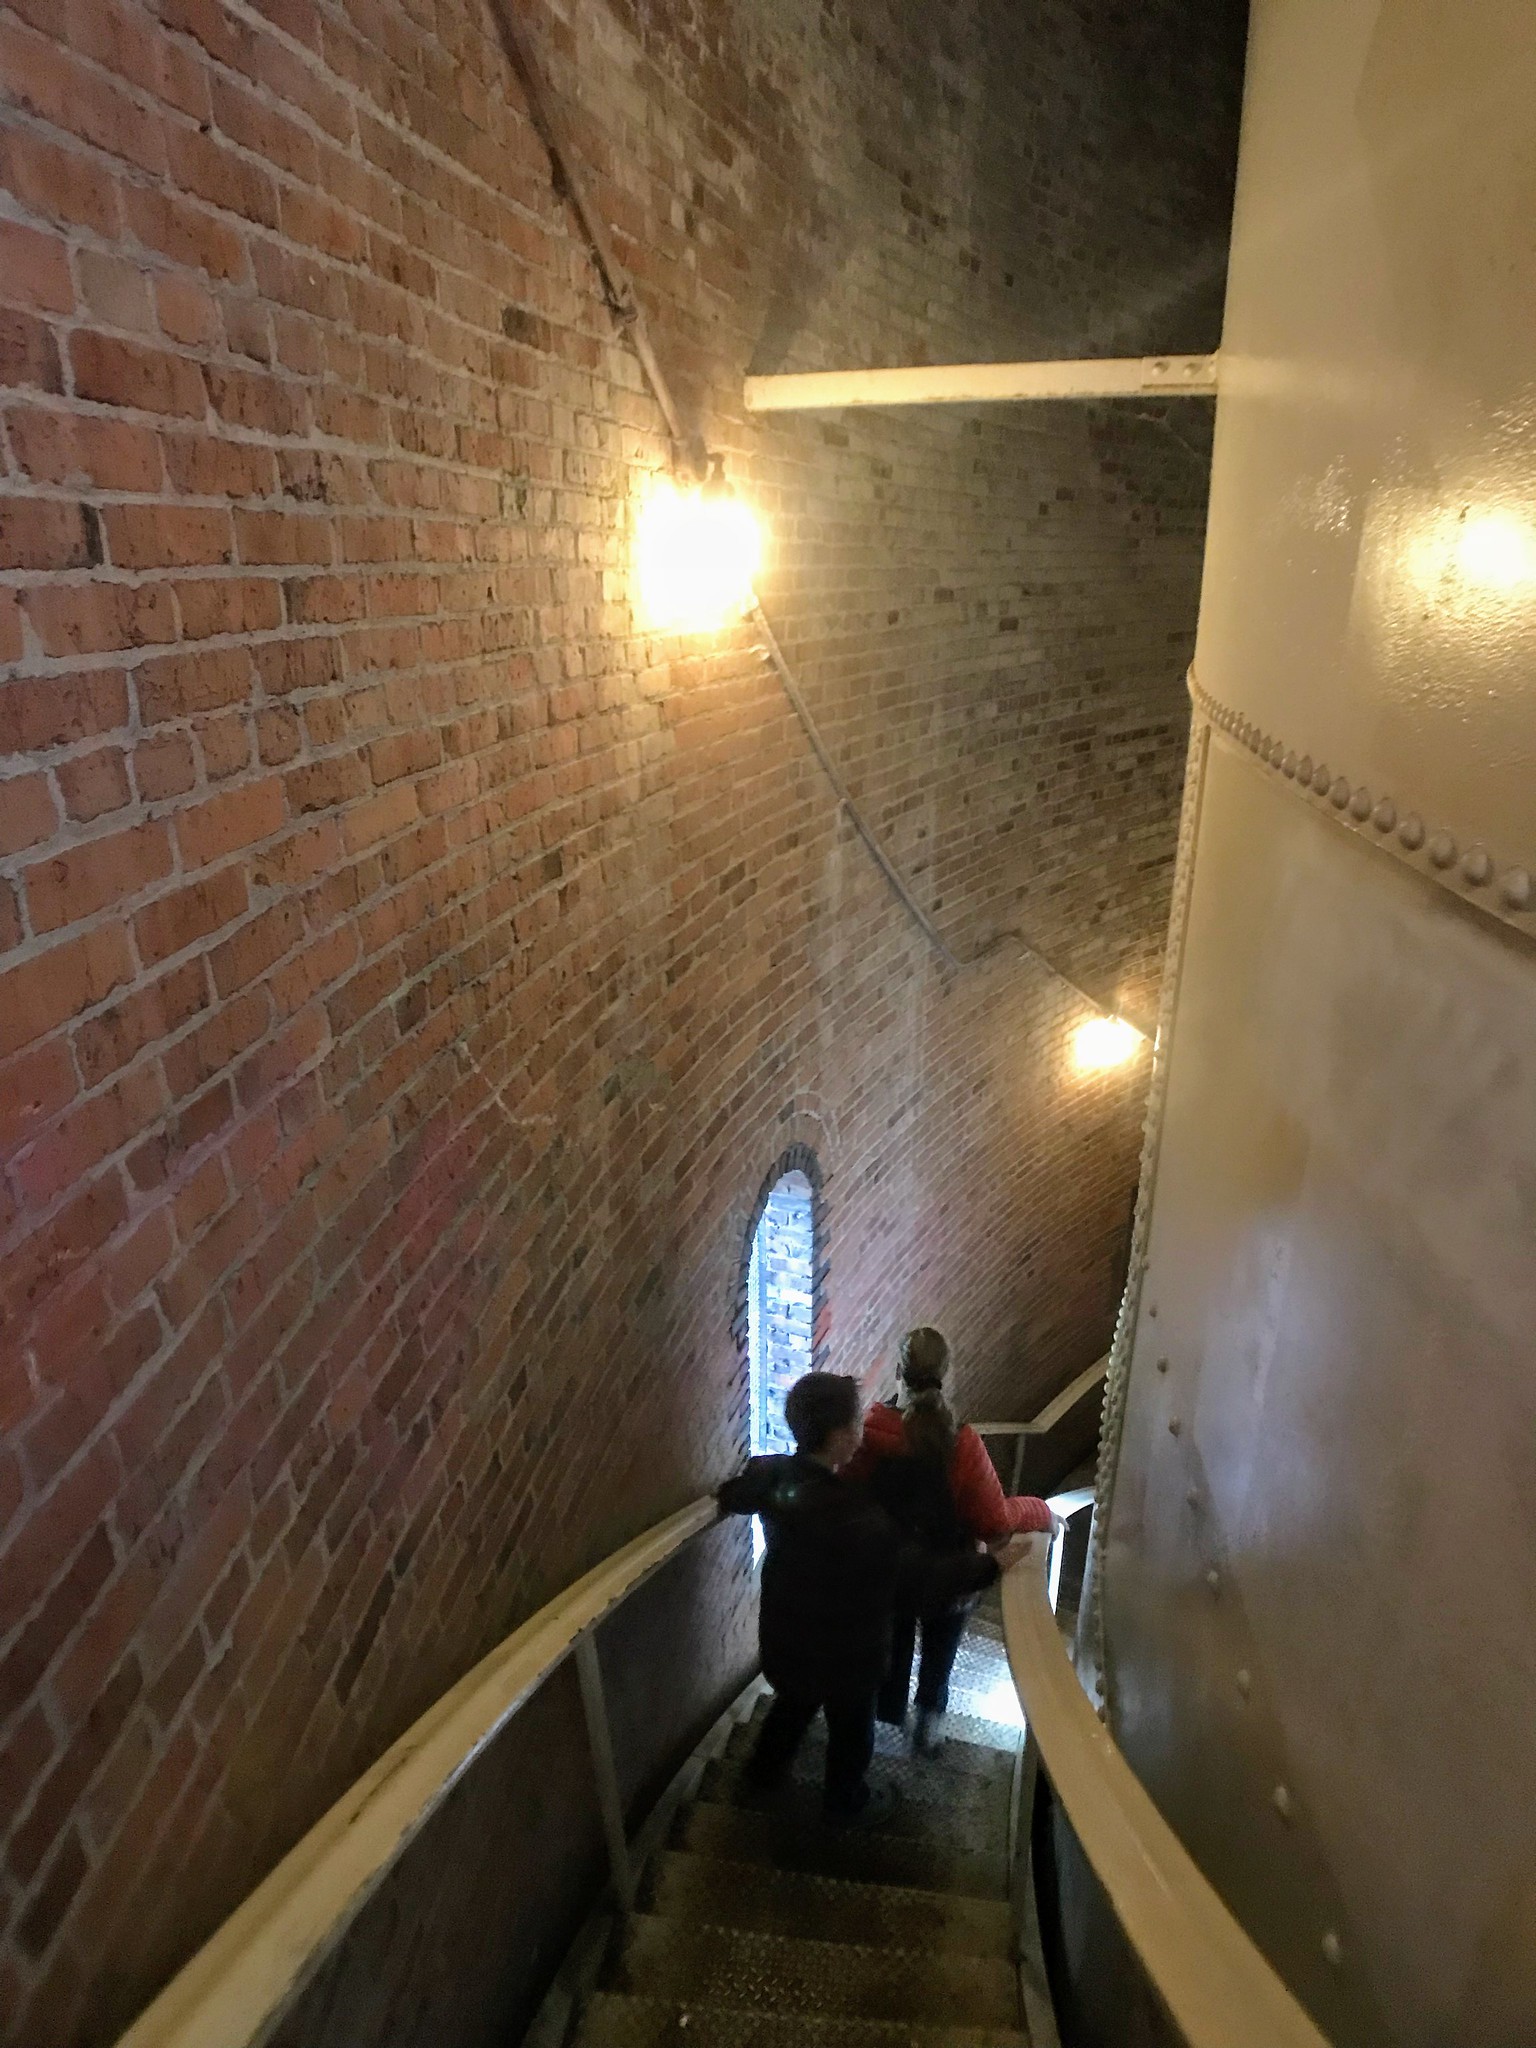 Descending the water tower stairs